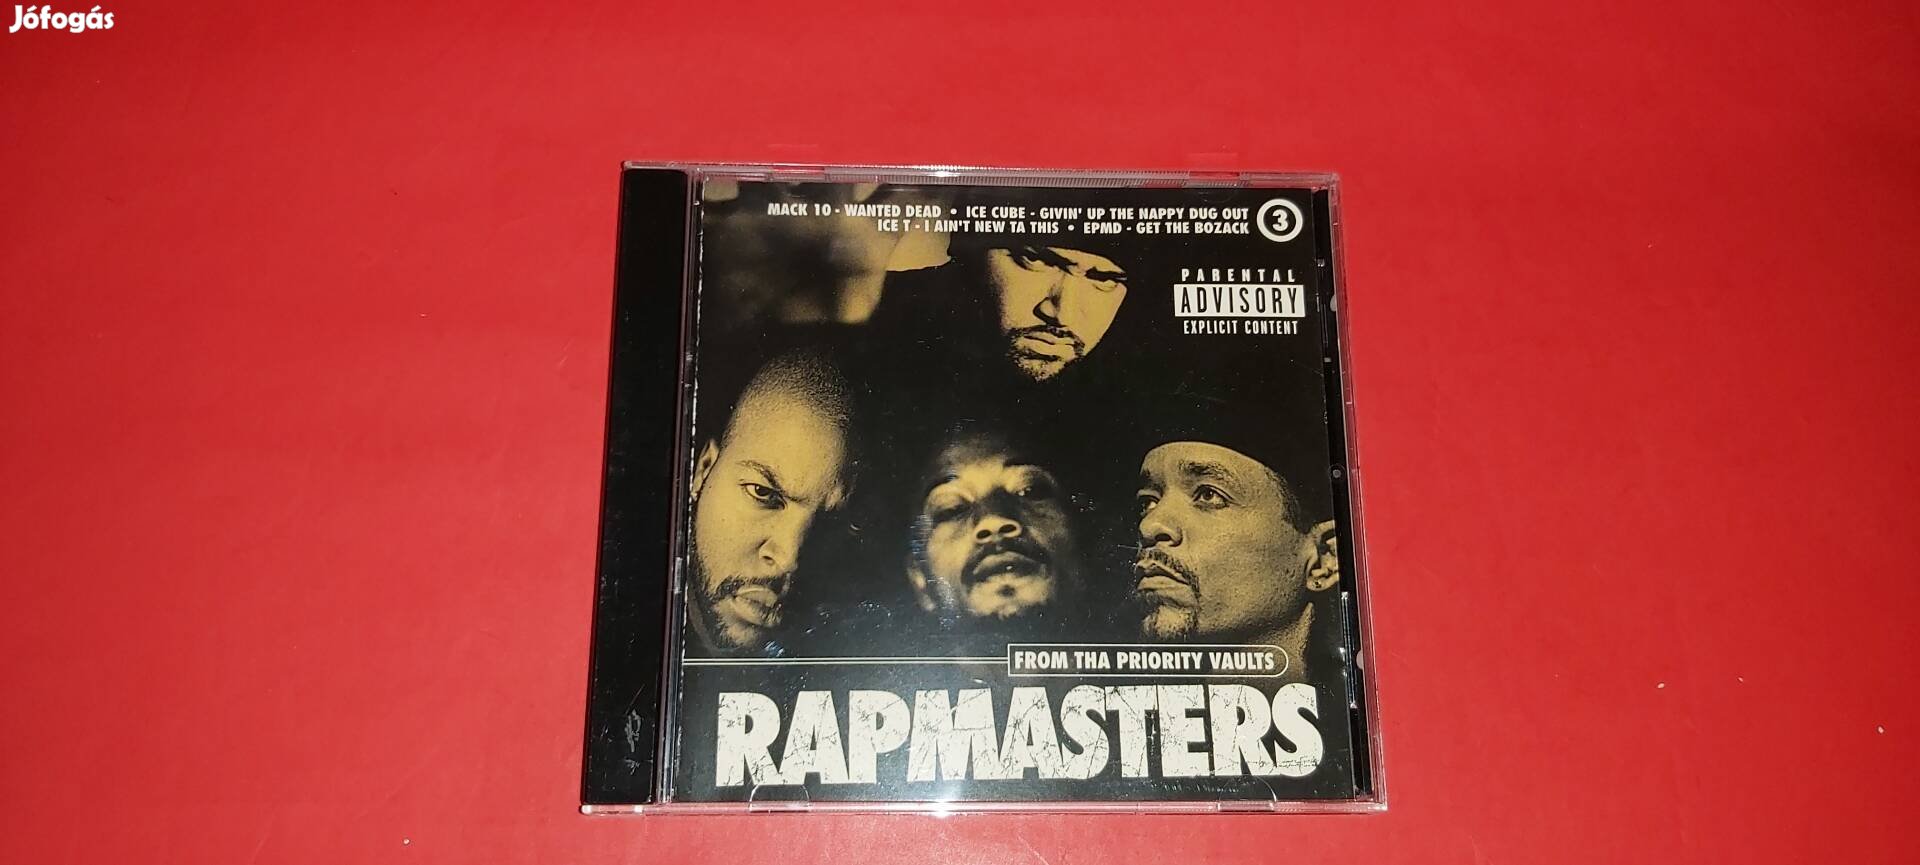 Rapmaster From tha priority vaults vol.3 Cd 1996